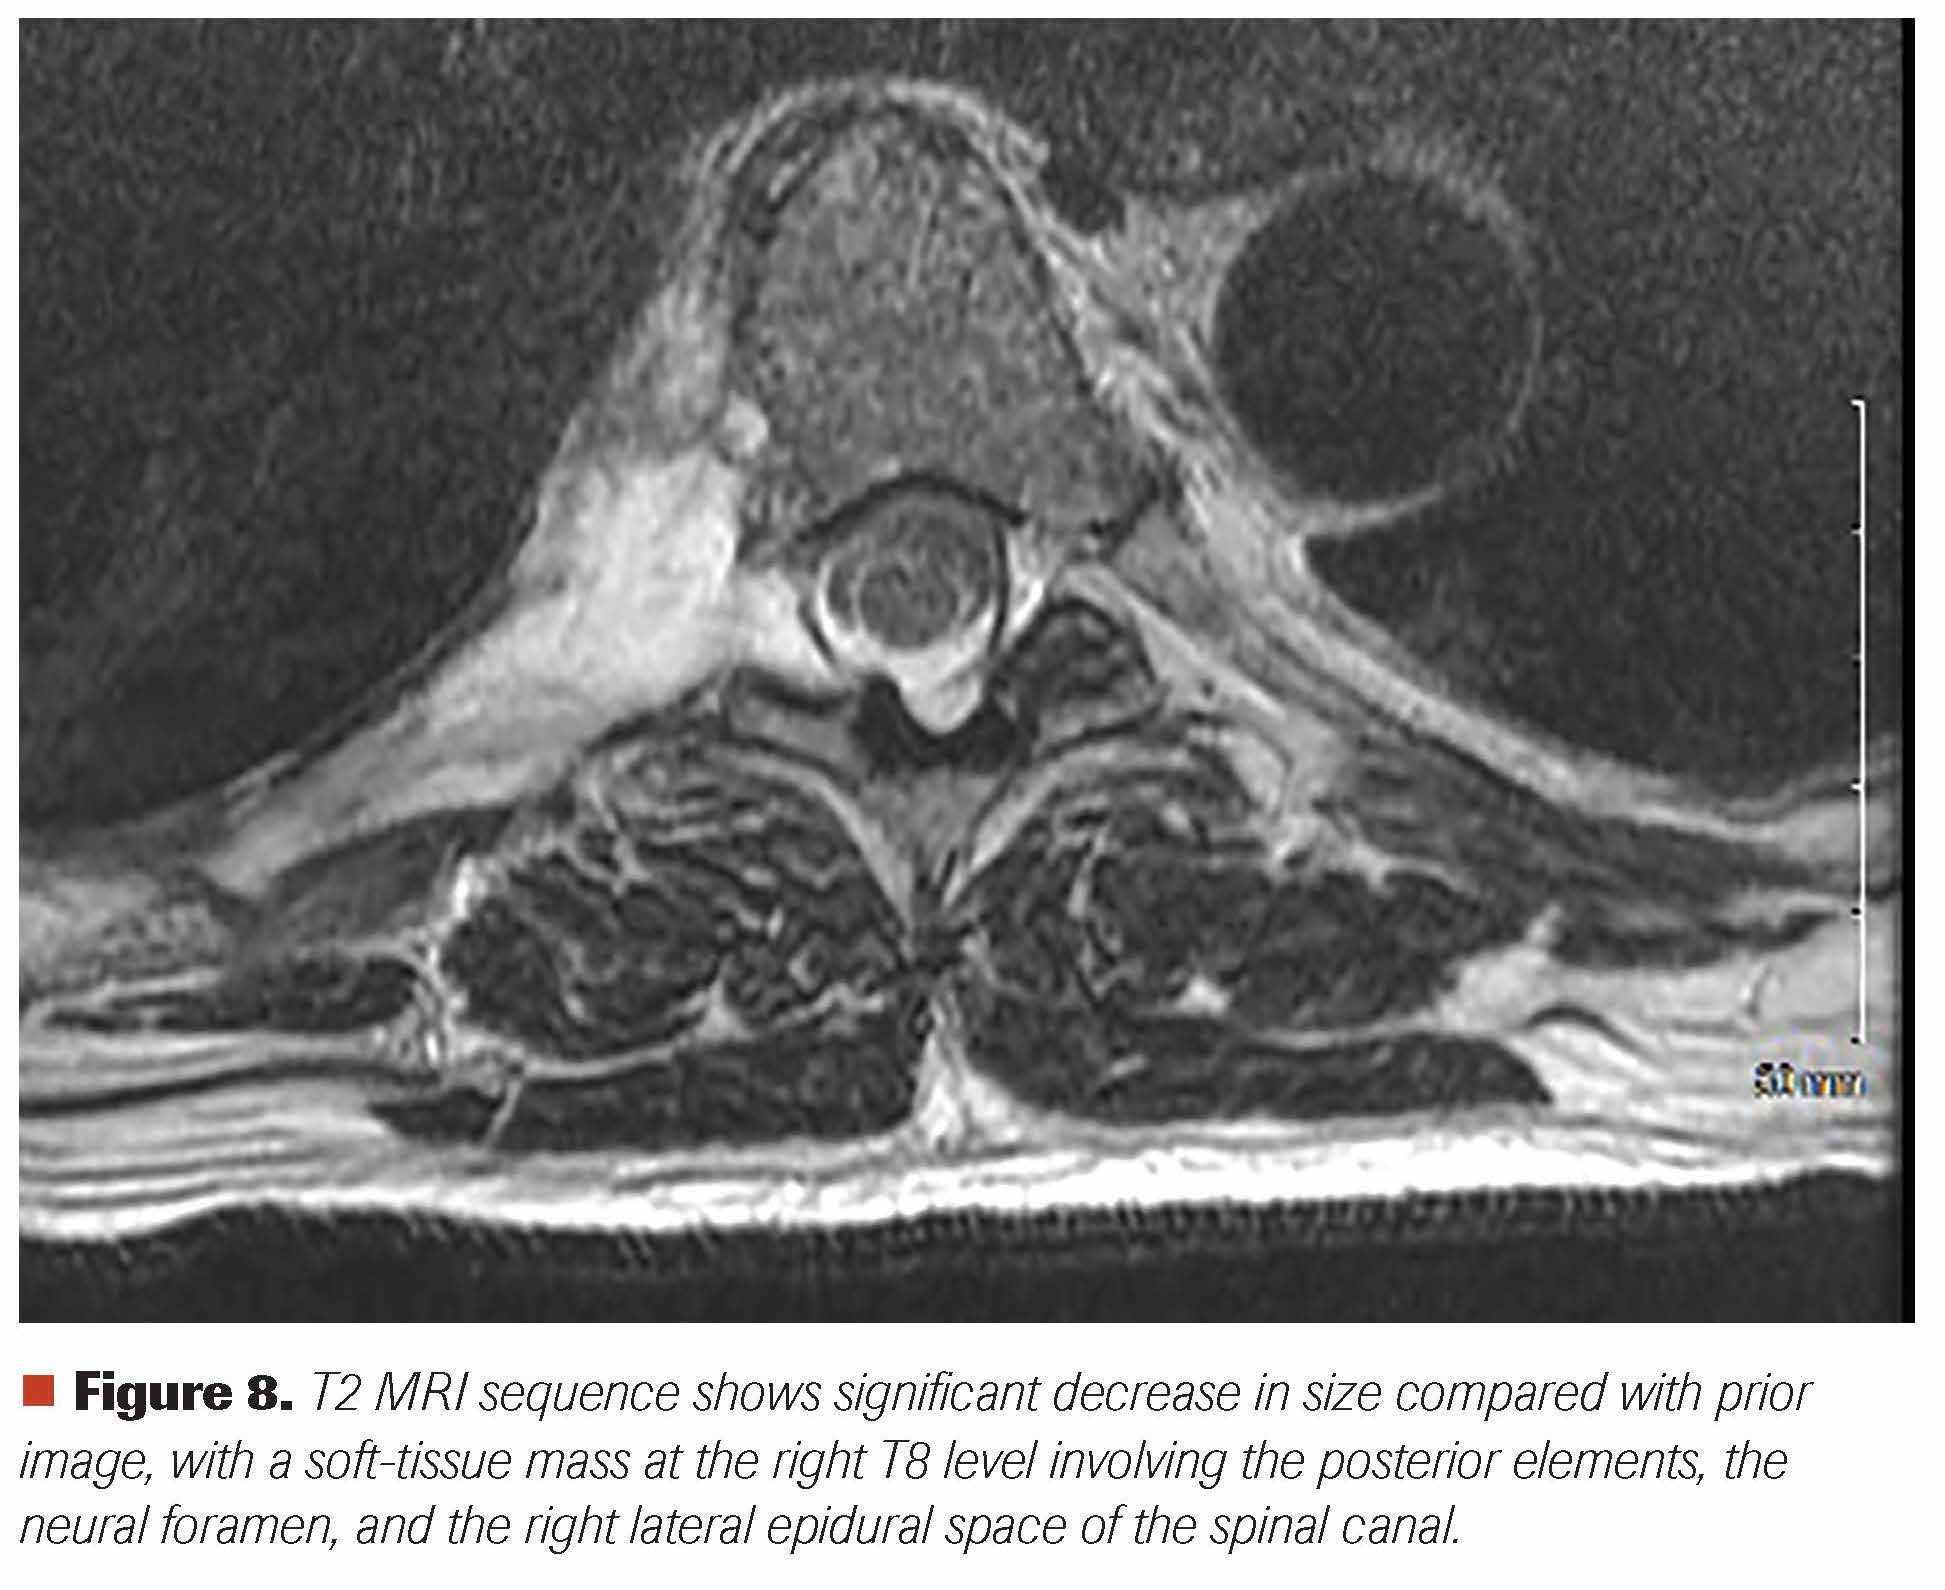 Figure 8. T2 MRI sequence shows significant decrease in size compared with prior image, with a soft-tissue mass at the right T8 level involving the posterior elements, the neural foramen, and the right lateral epidural space of the spinal canal.